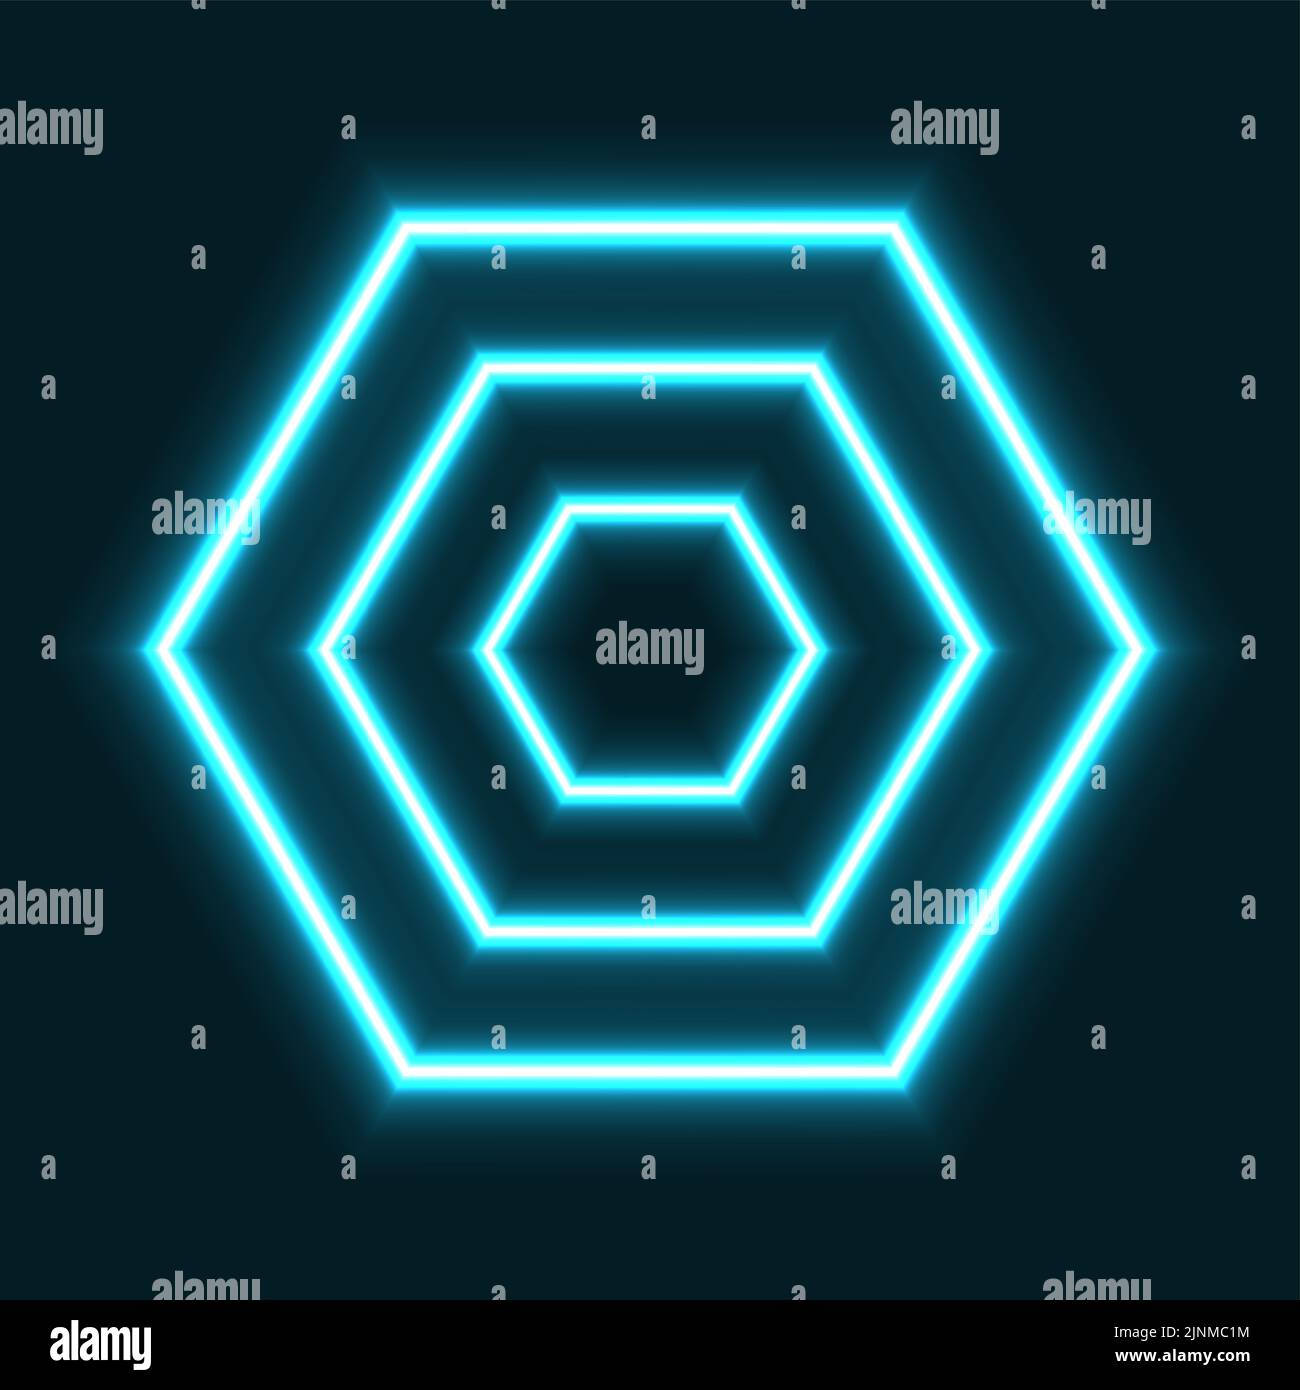 Three hexagons, turquoise colored and with neon glow effect, on a black background. Horizontal polygons, with six sides each. Stock Photo